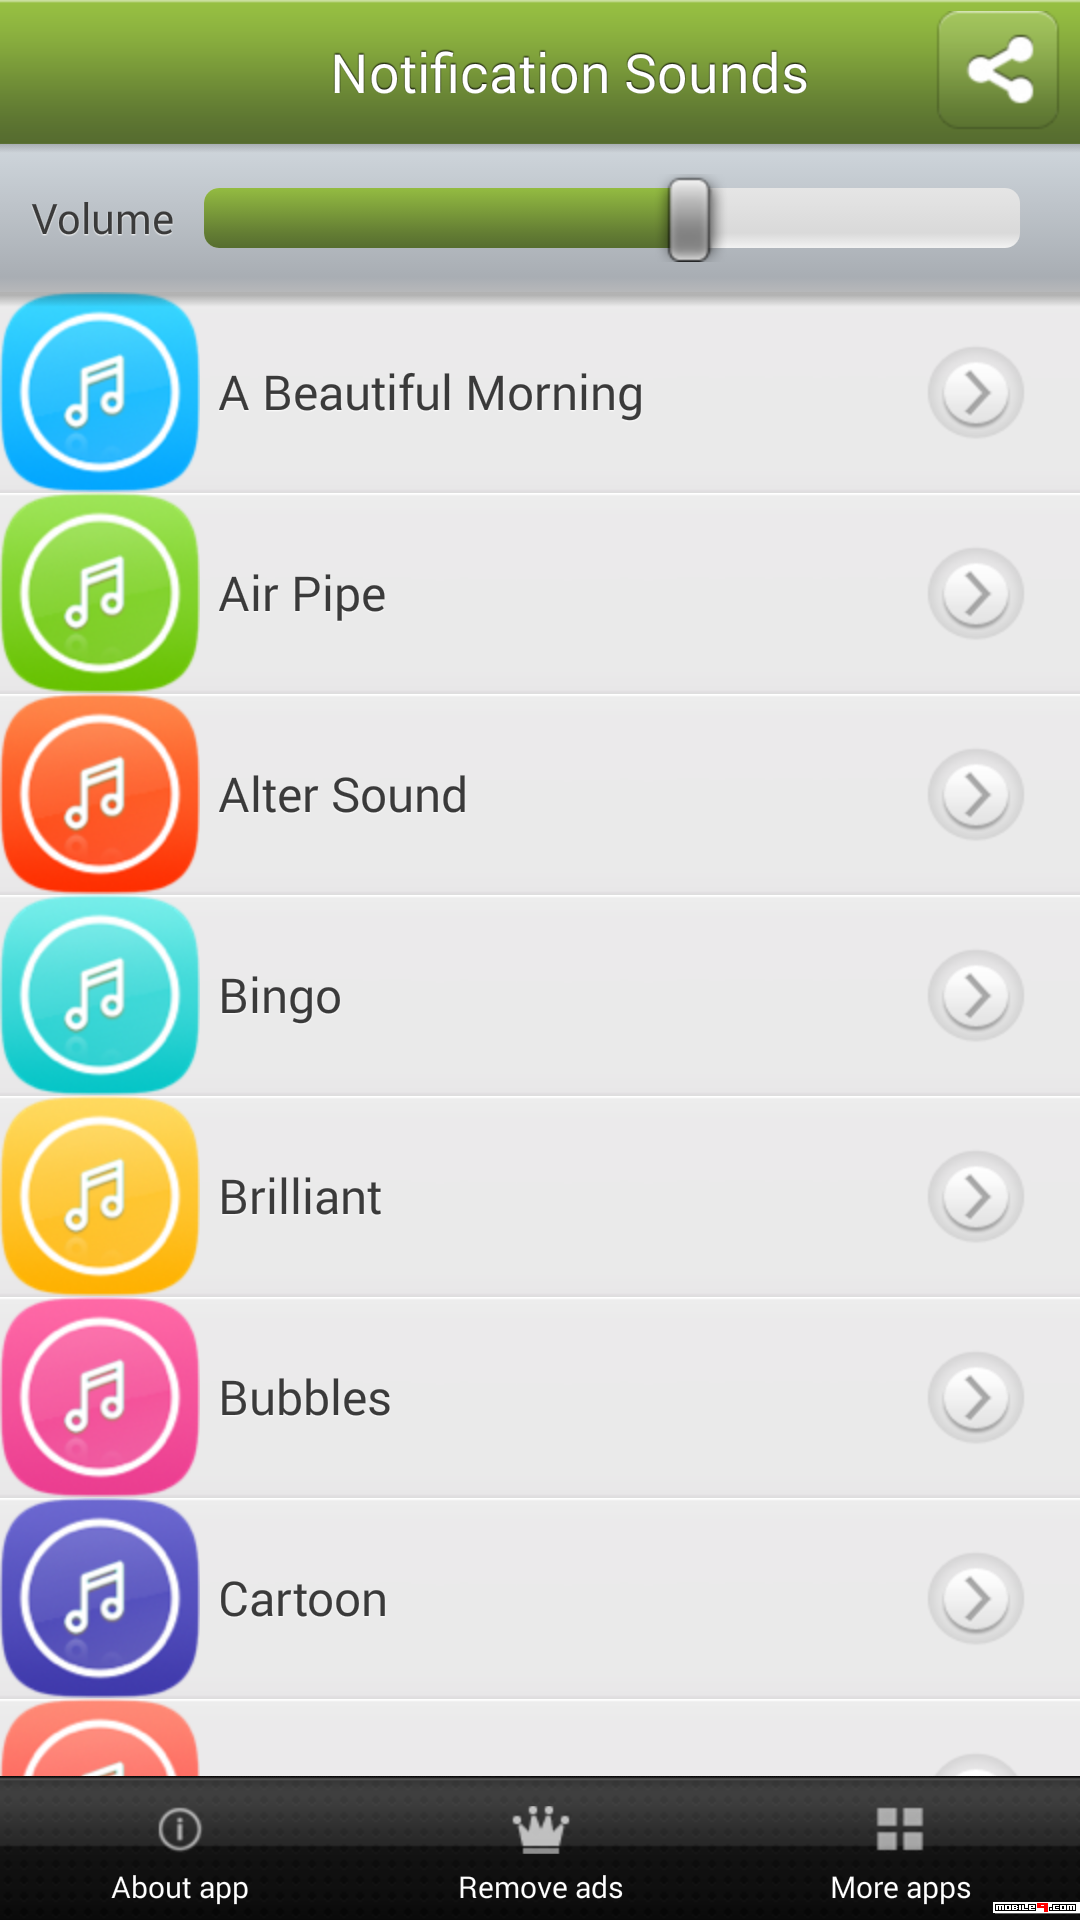 Download Notification Sounds Android Apps APK 4167532